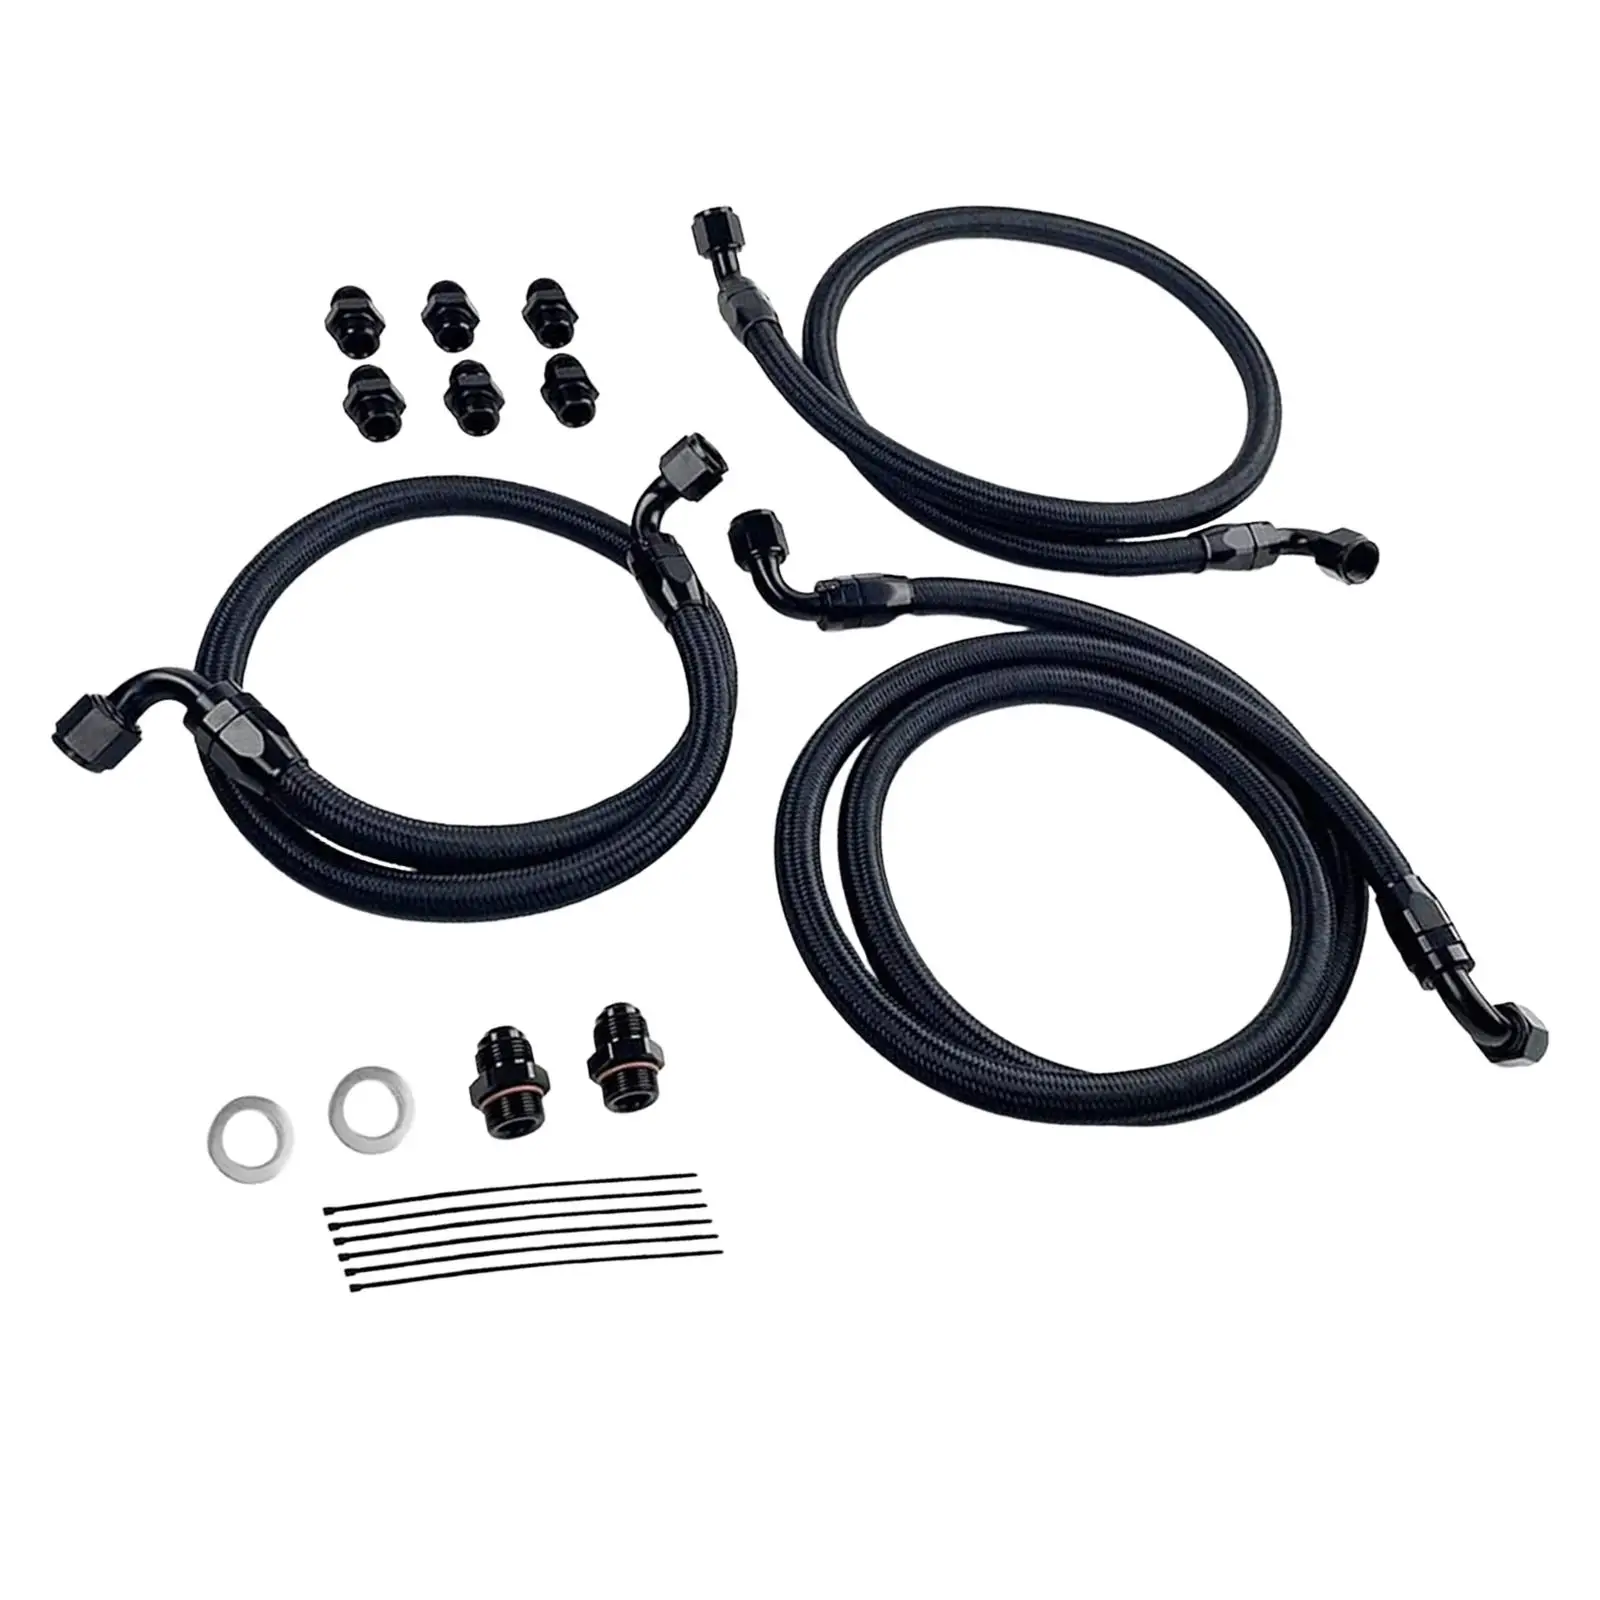 Transmission Cooler Lines Aluminum Alloy Transmission Cooler Hose Fittings Accessories for Chevy 3500 2006 to 2010 Odl14